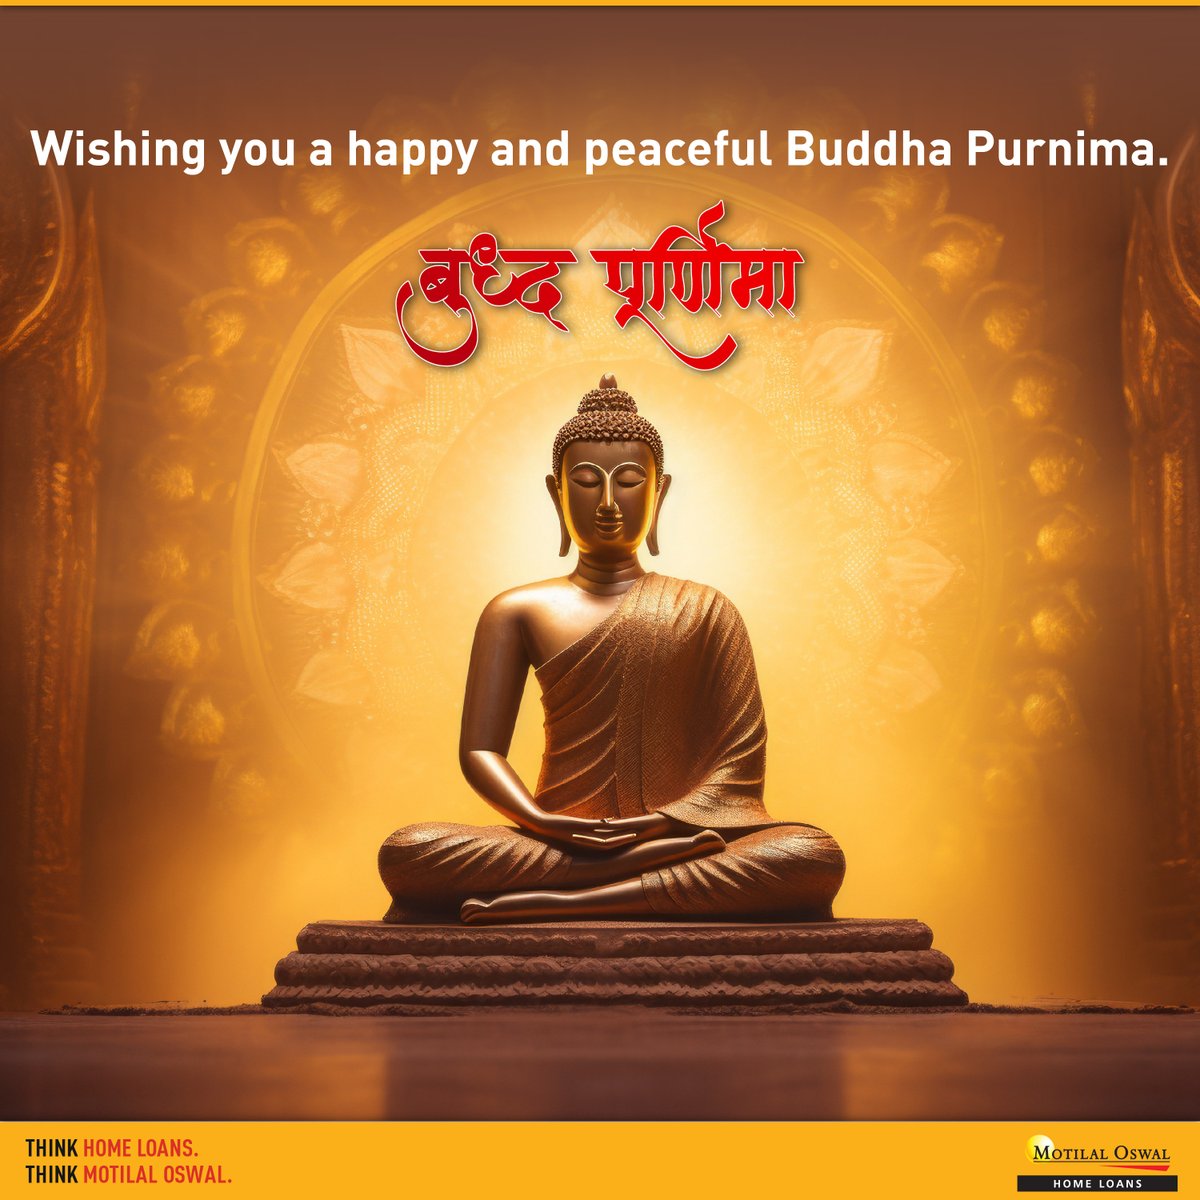 Wishing you a happy and peaceful Buddha Purnima.

“In separateness lies the world’s greatest misery; in compassion lies the world’s true strength.'  

#ThinkHomeLoansThinkMotilalOswal #HomeLoans #Loans #MOHF #quickprocess #digitalprocess #paperless #buddha #Buddhapurnima